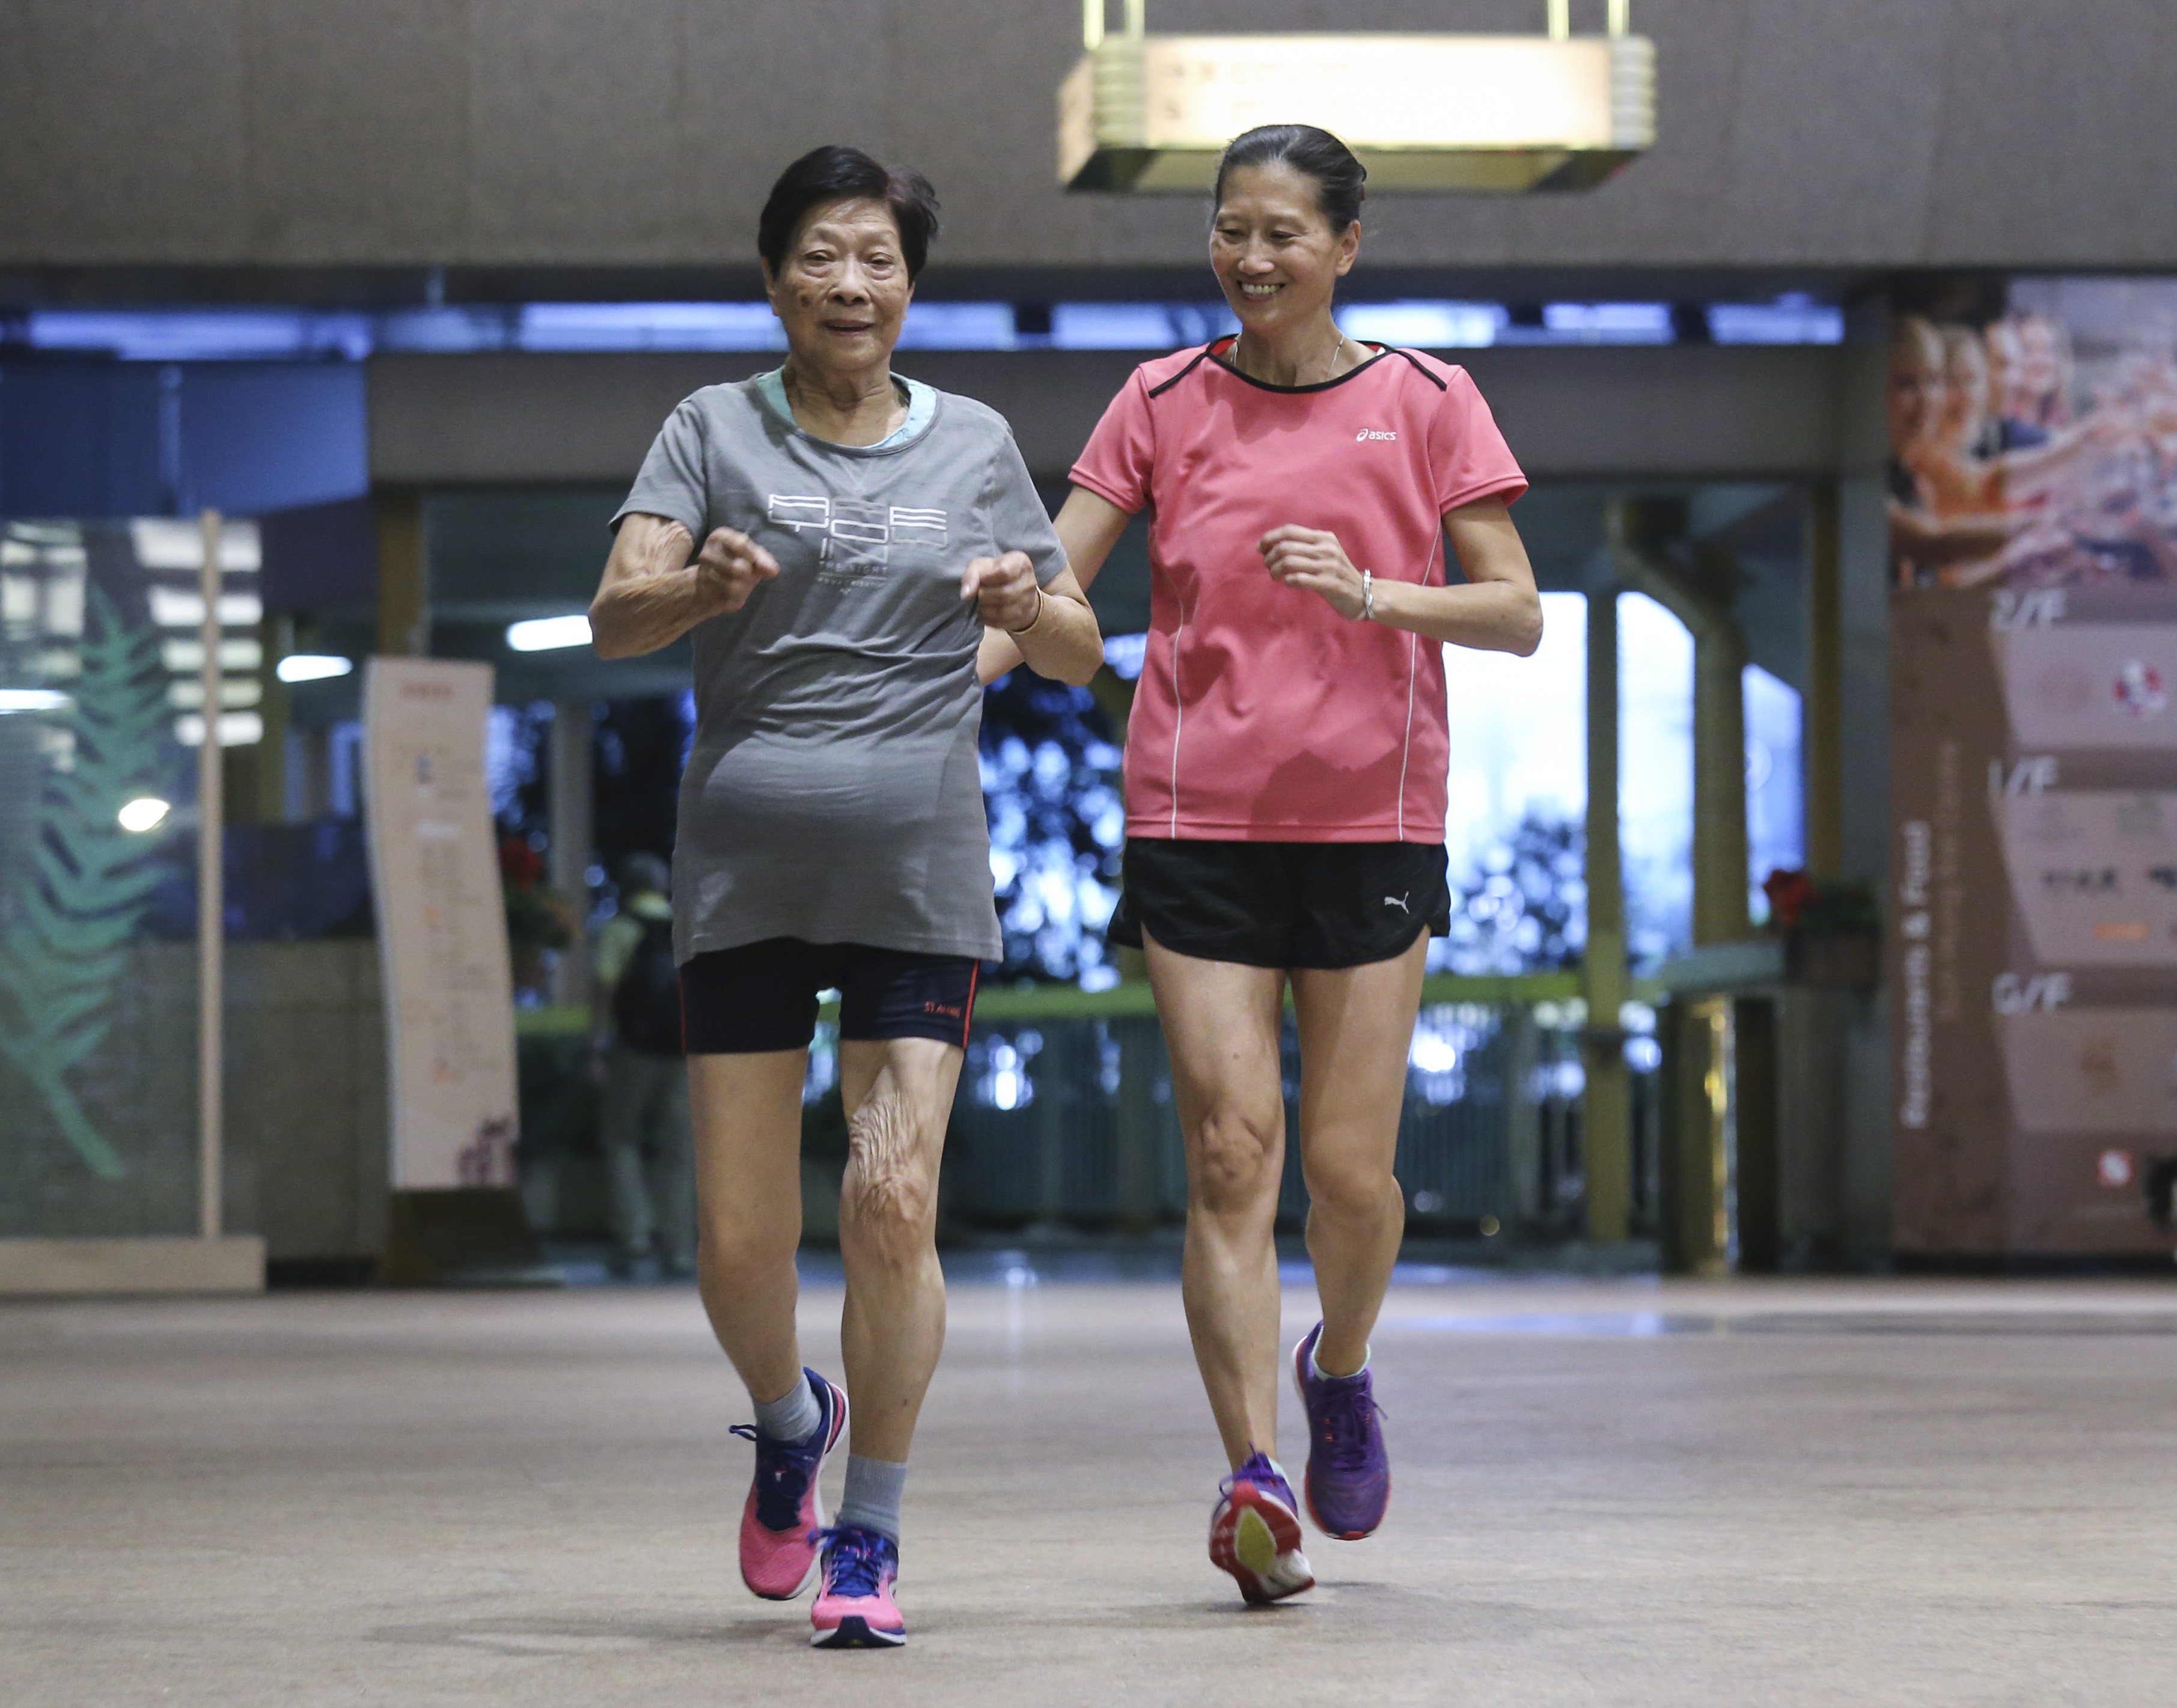 Award-winning Hong Kong athlete Cheung Suet-ling (left) trains with her daughter Lai Yin-mei. Physical fitness has been emphasised at all ages, but fiscal fitness may need prioritisation as society ages. Photo: Dickson Lee